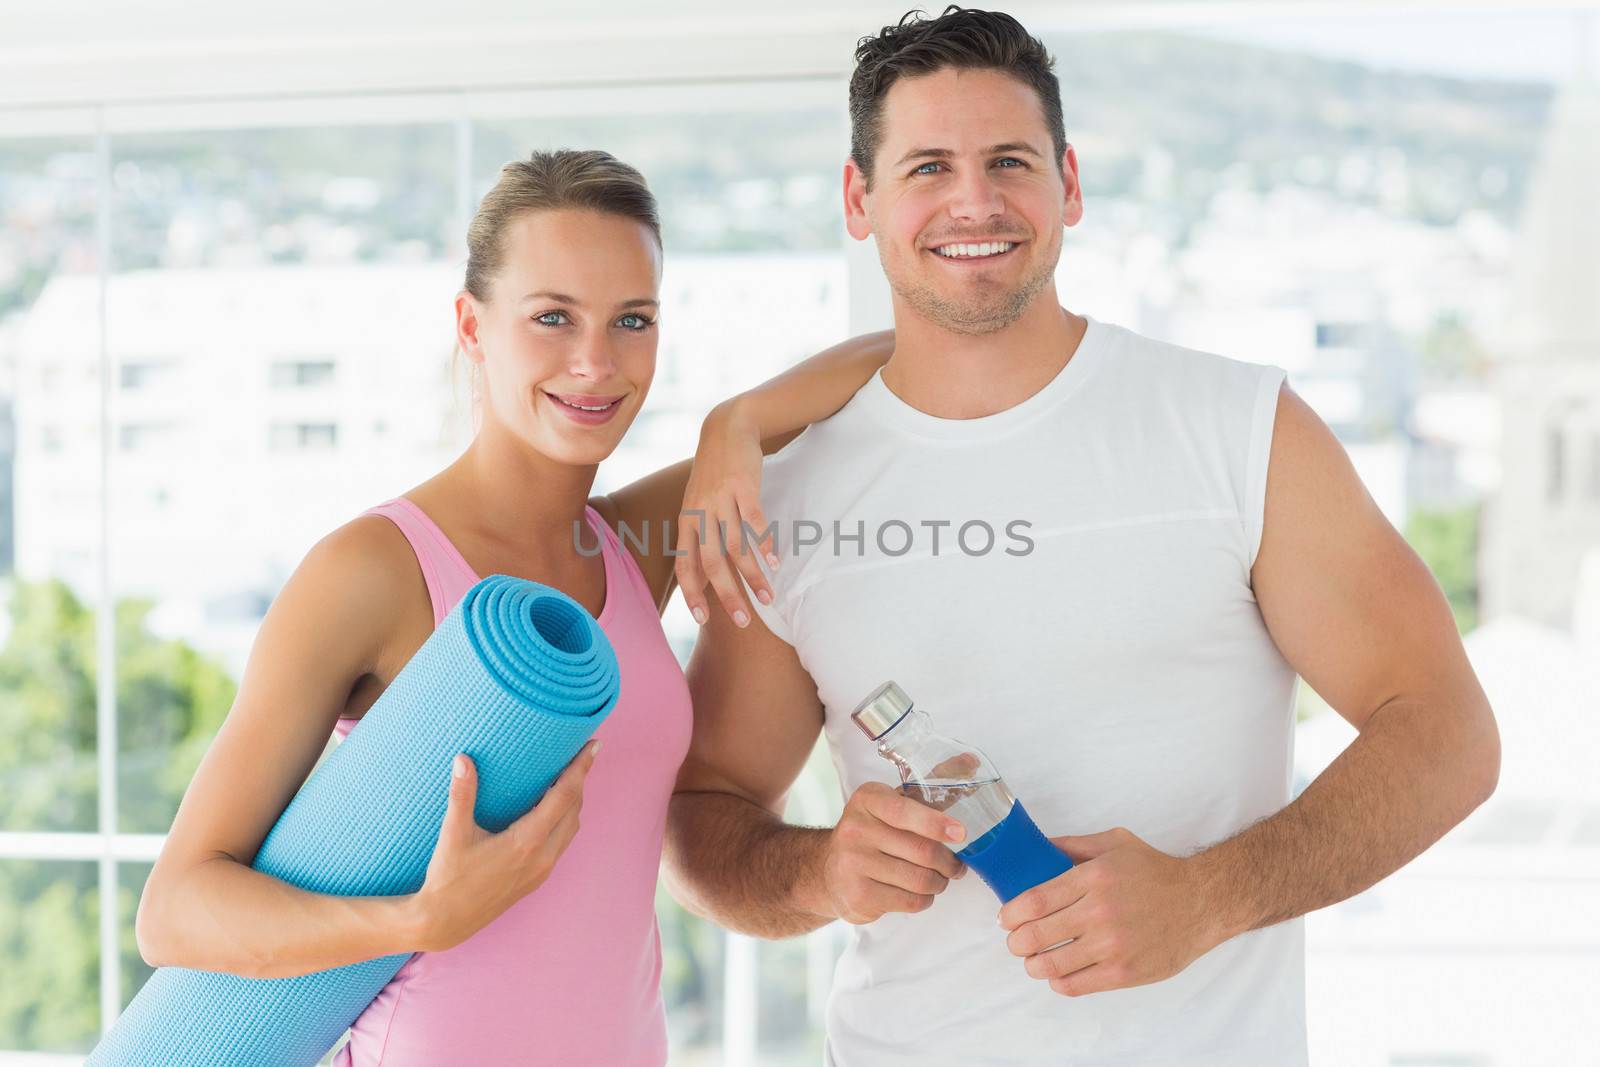 Portrait of a fit couple holding water bottle and exercise mat in bright exercise room